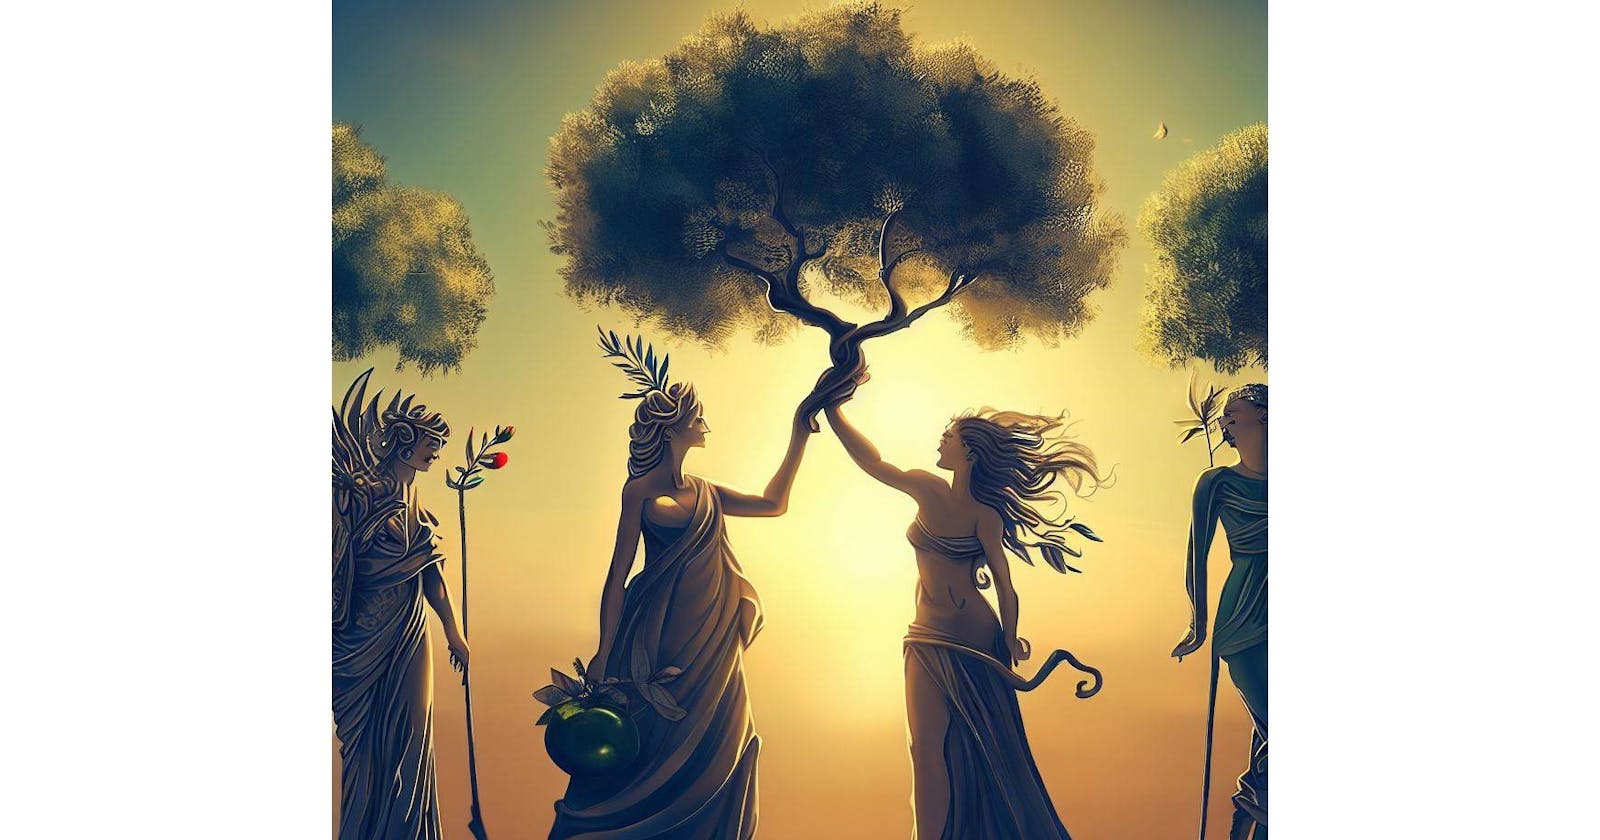 What are wishing trees in Greek Mythology?